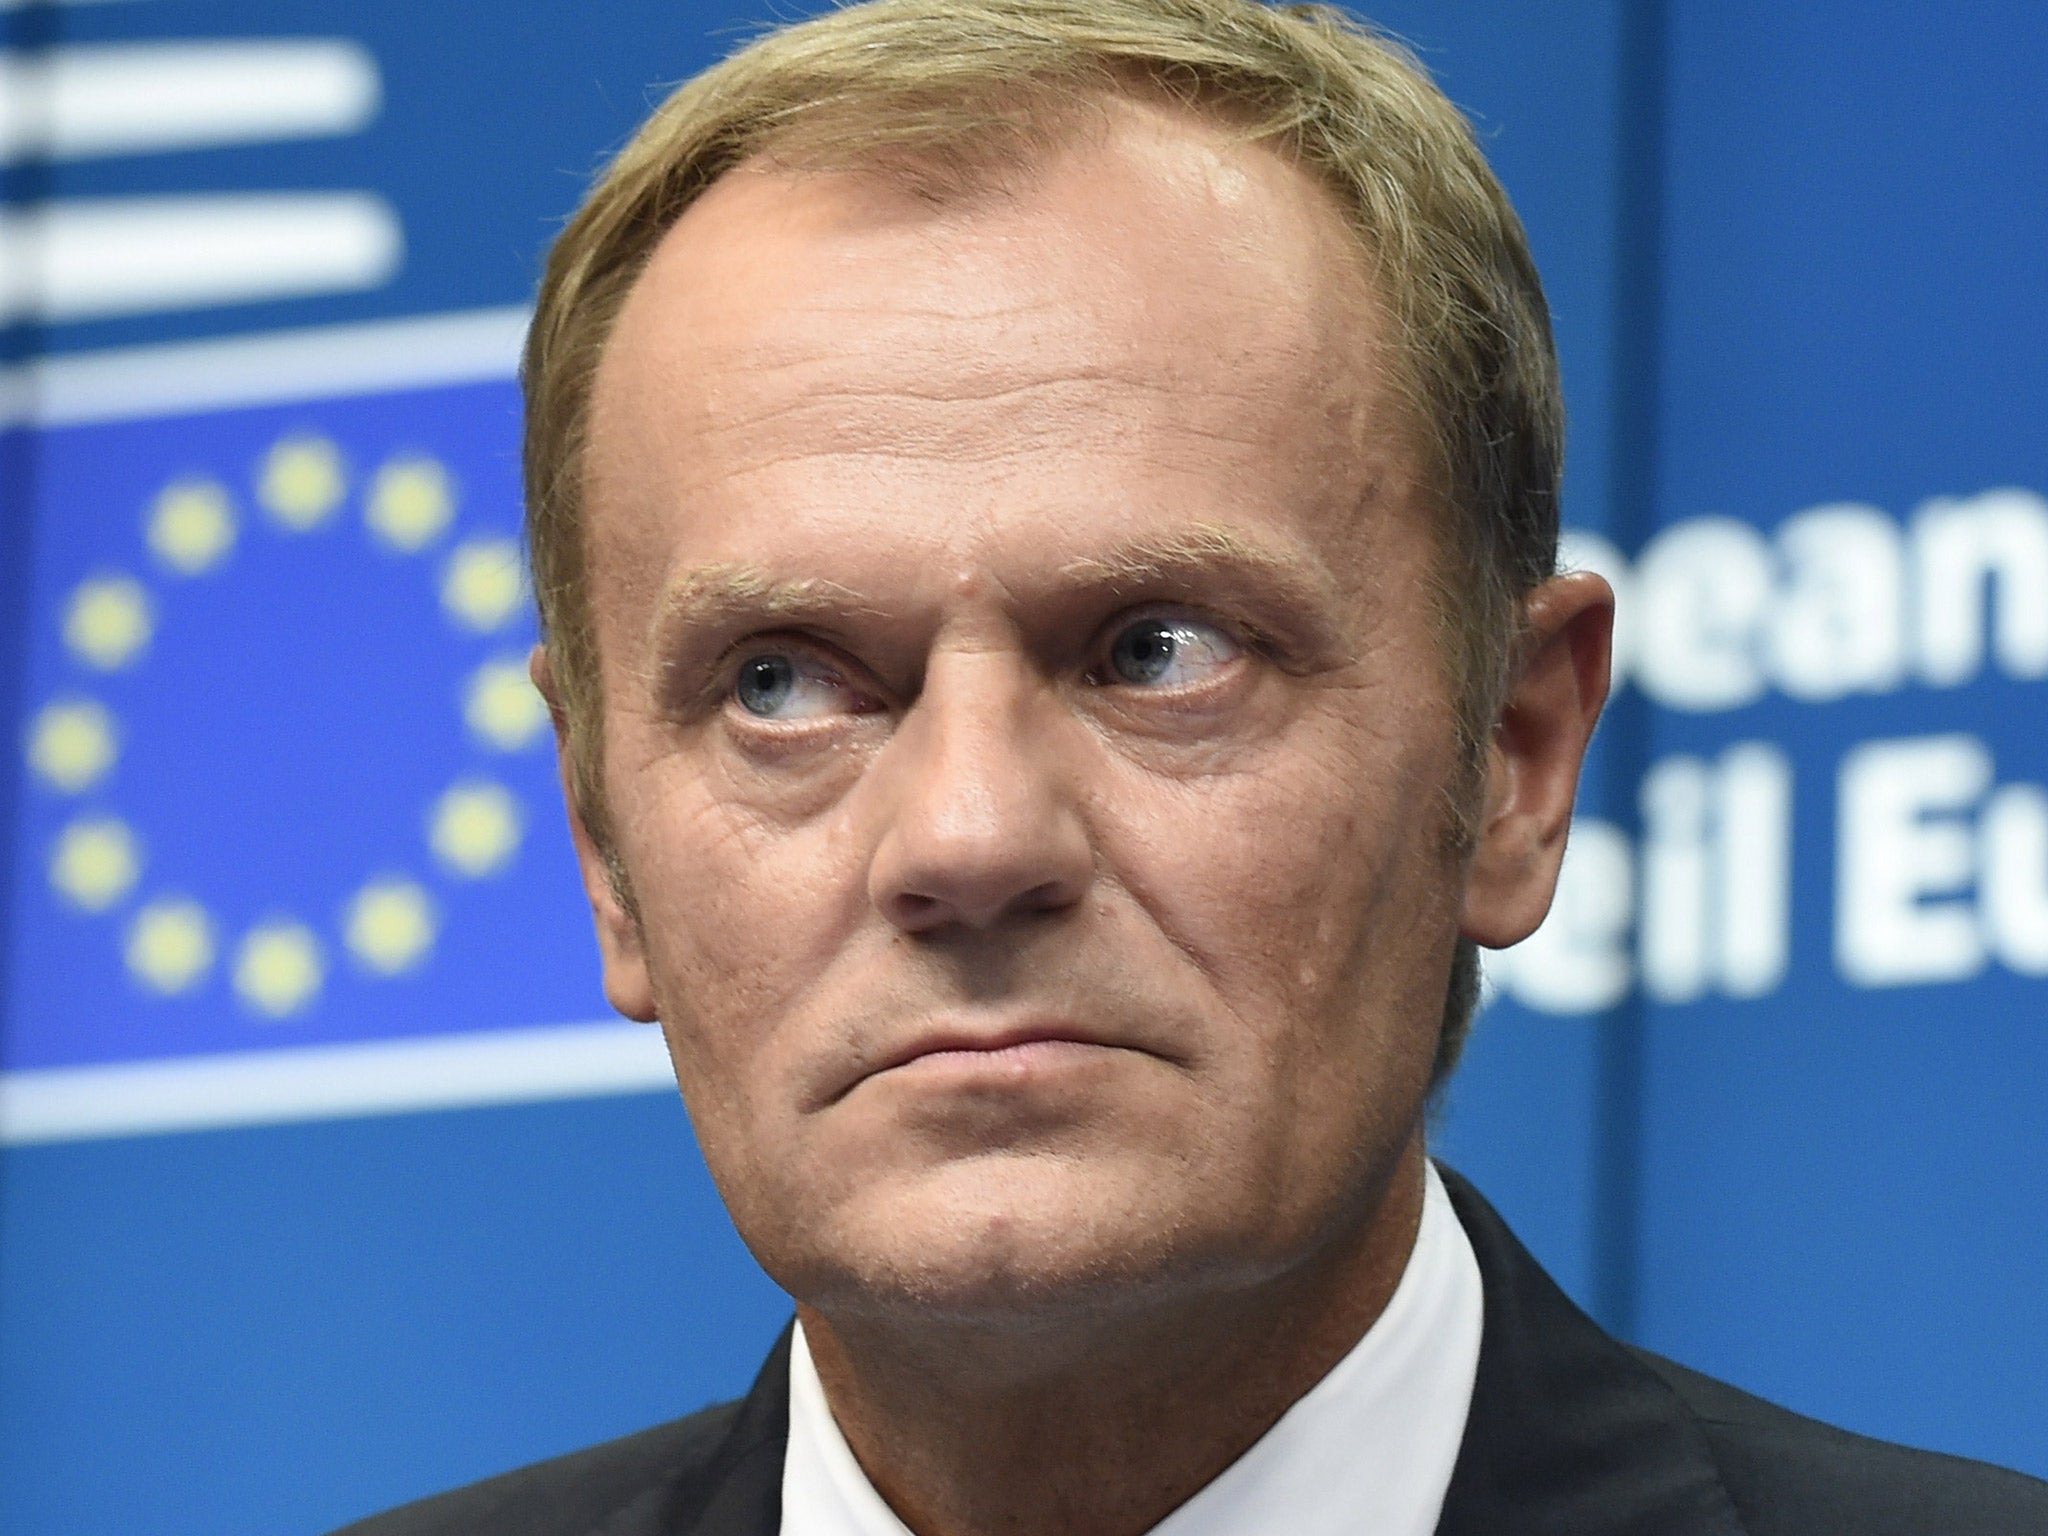 European Council President Donald Tusk has said that ‘serious debate’ was needed on key issues